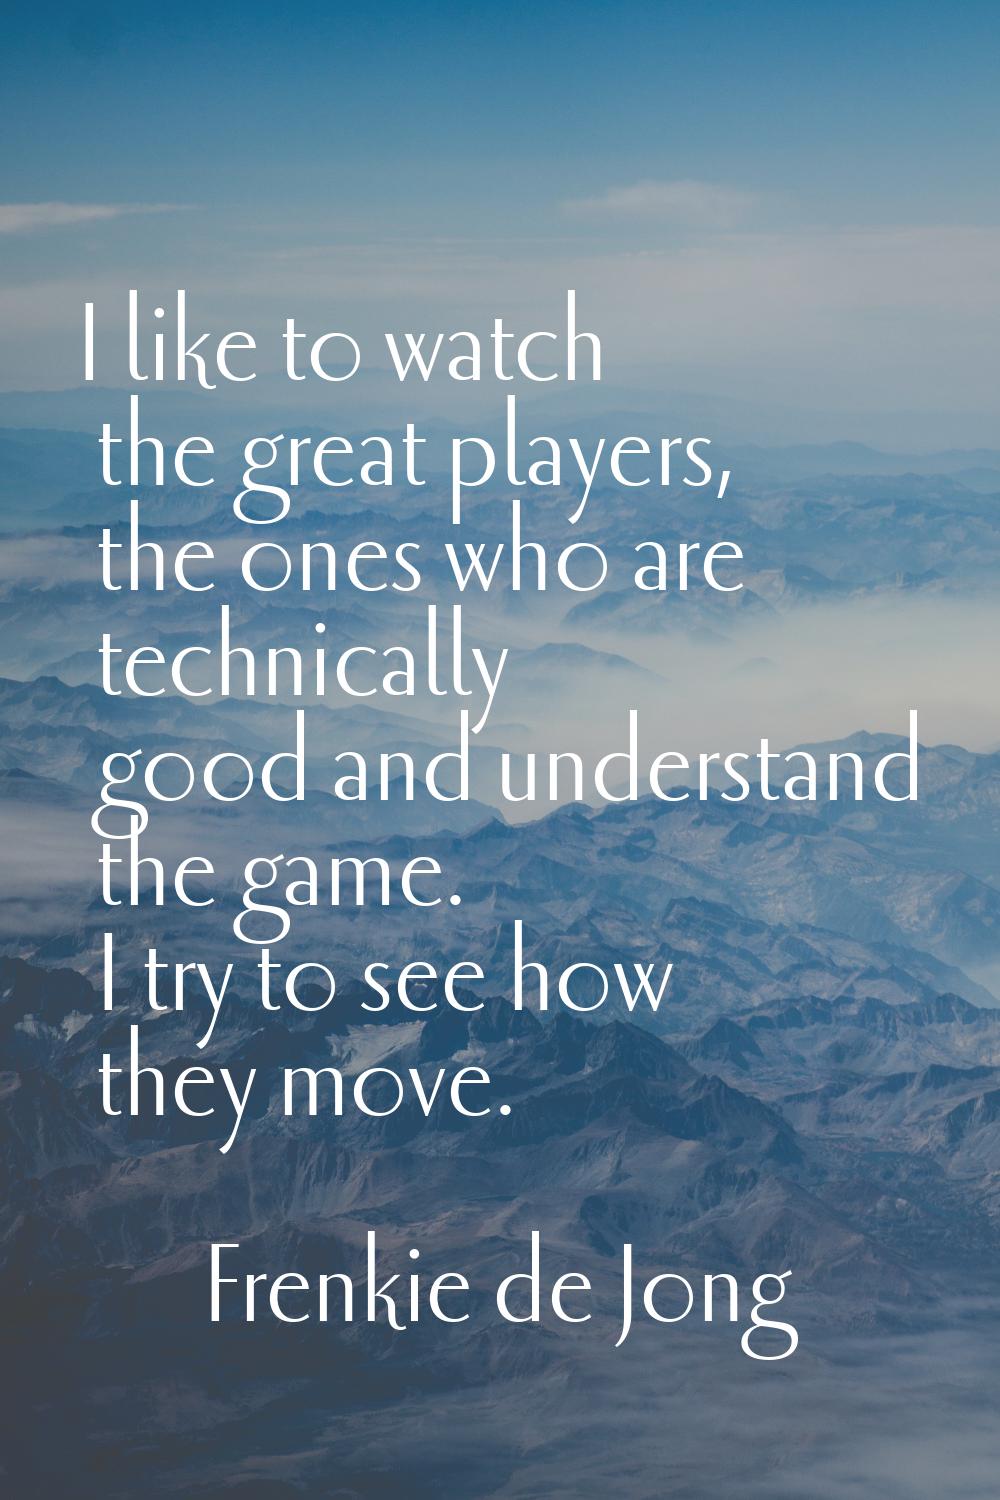 I like to watch the great players, the ones who are technically good and understand the game. I try